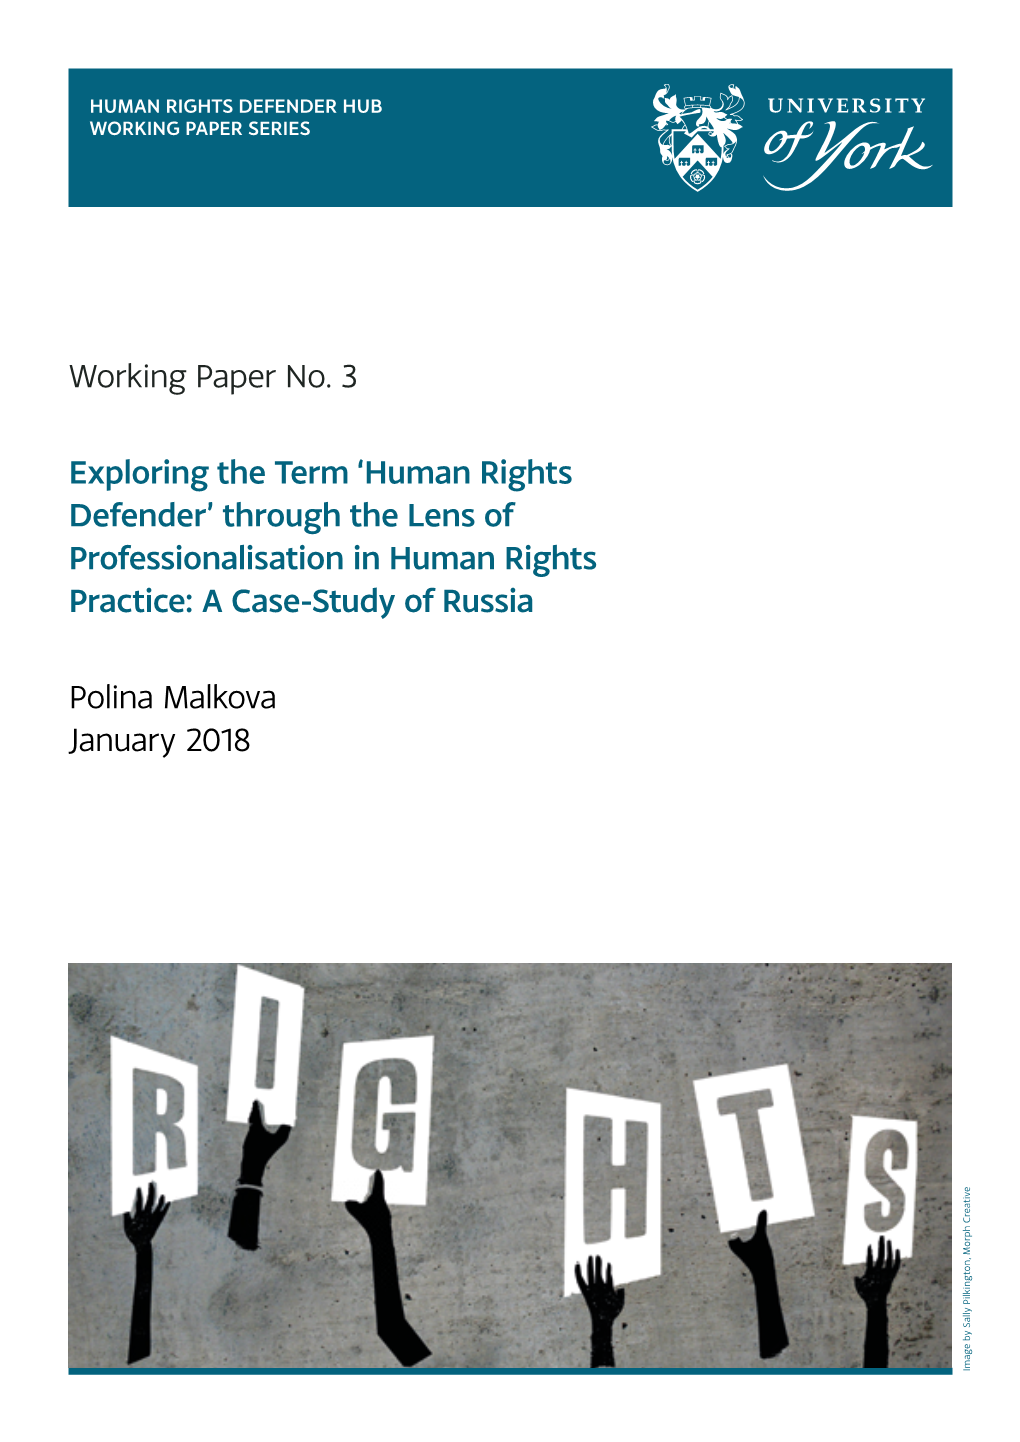 Working Paper No. 3 Exploring the Term 'Human Rights Defender'